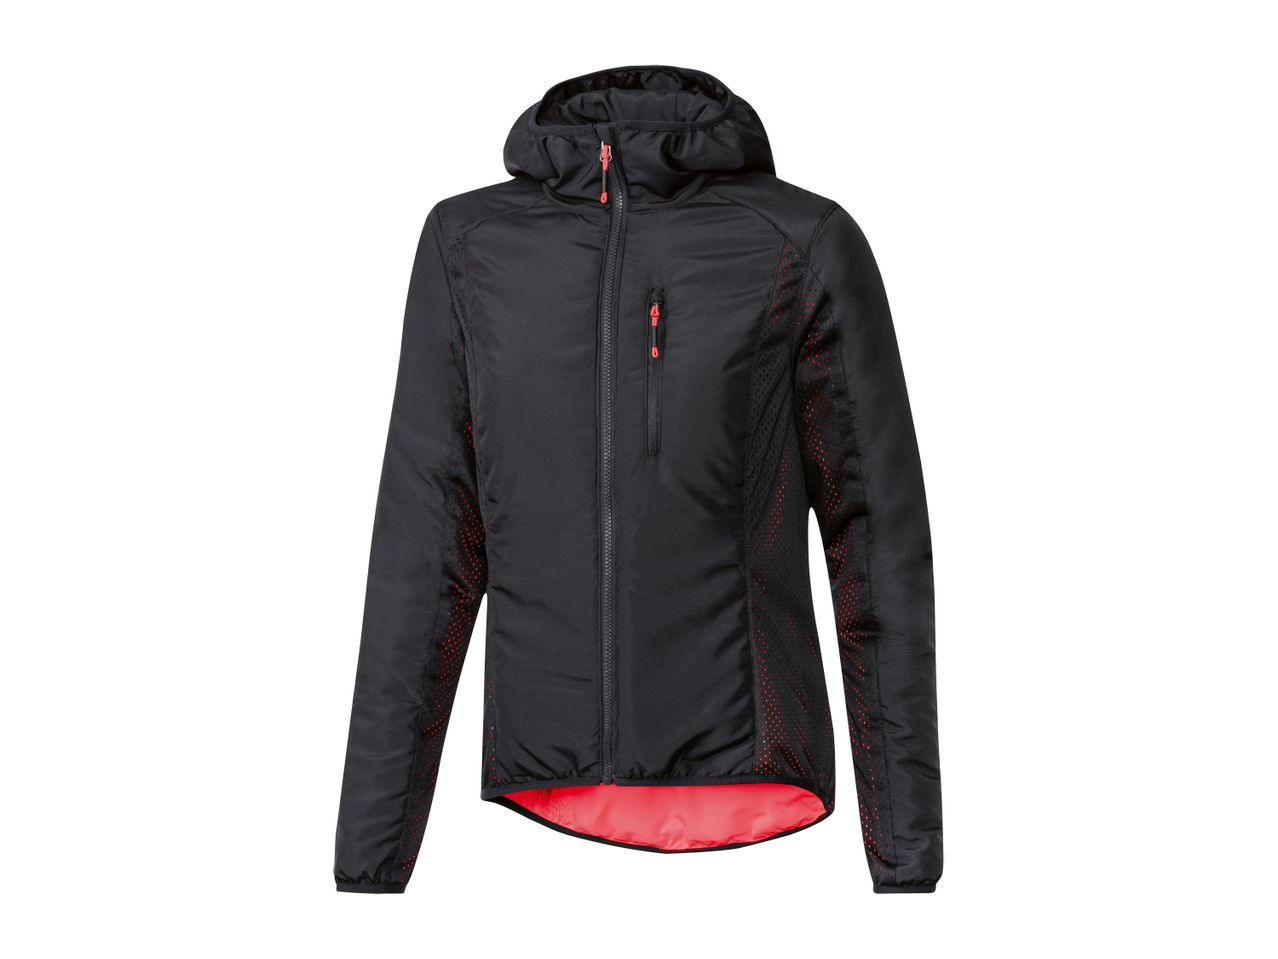 Go to full screen view: Crivit Ladies’ Reversible Cycling Jacket - Image 3